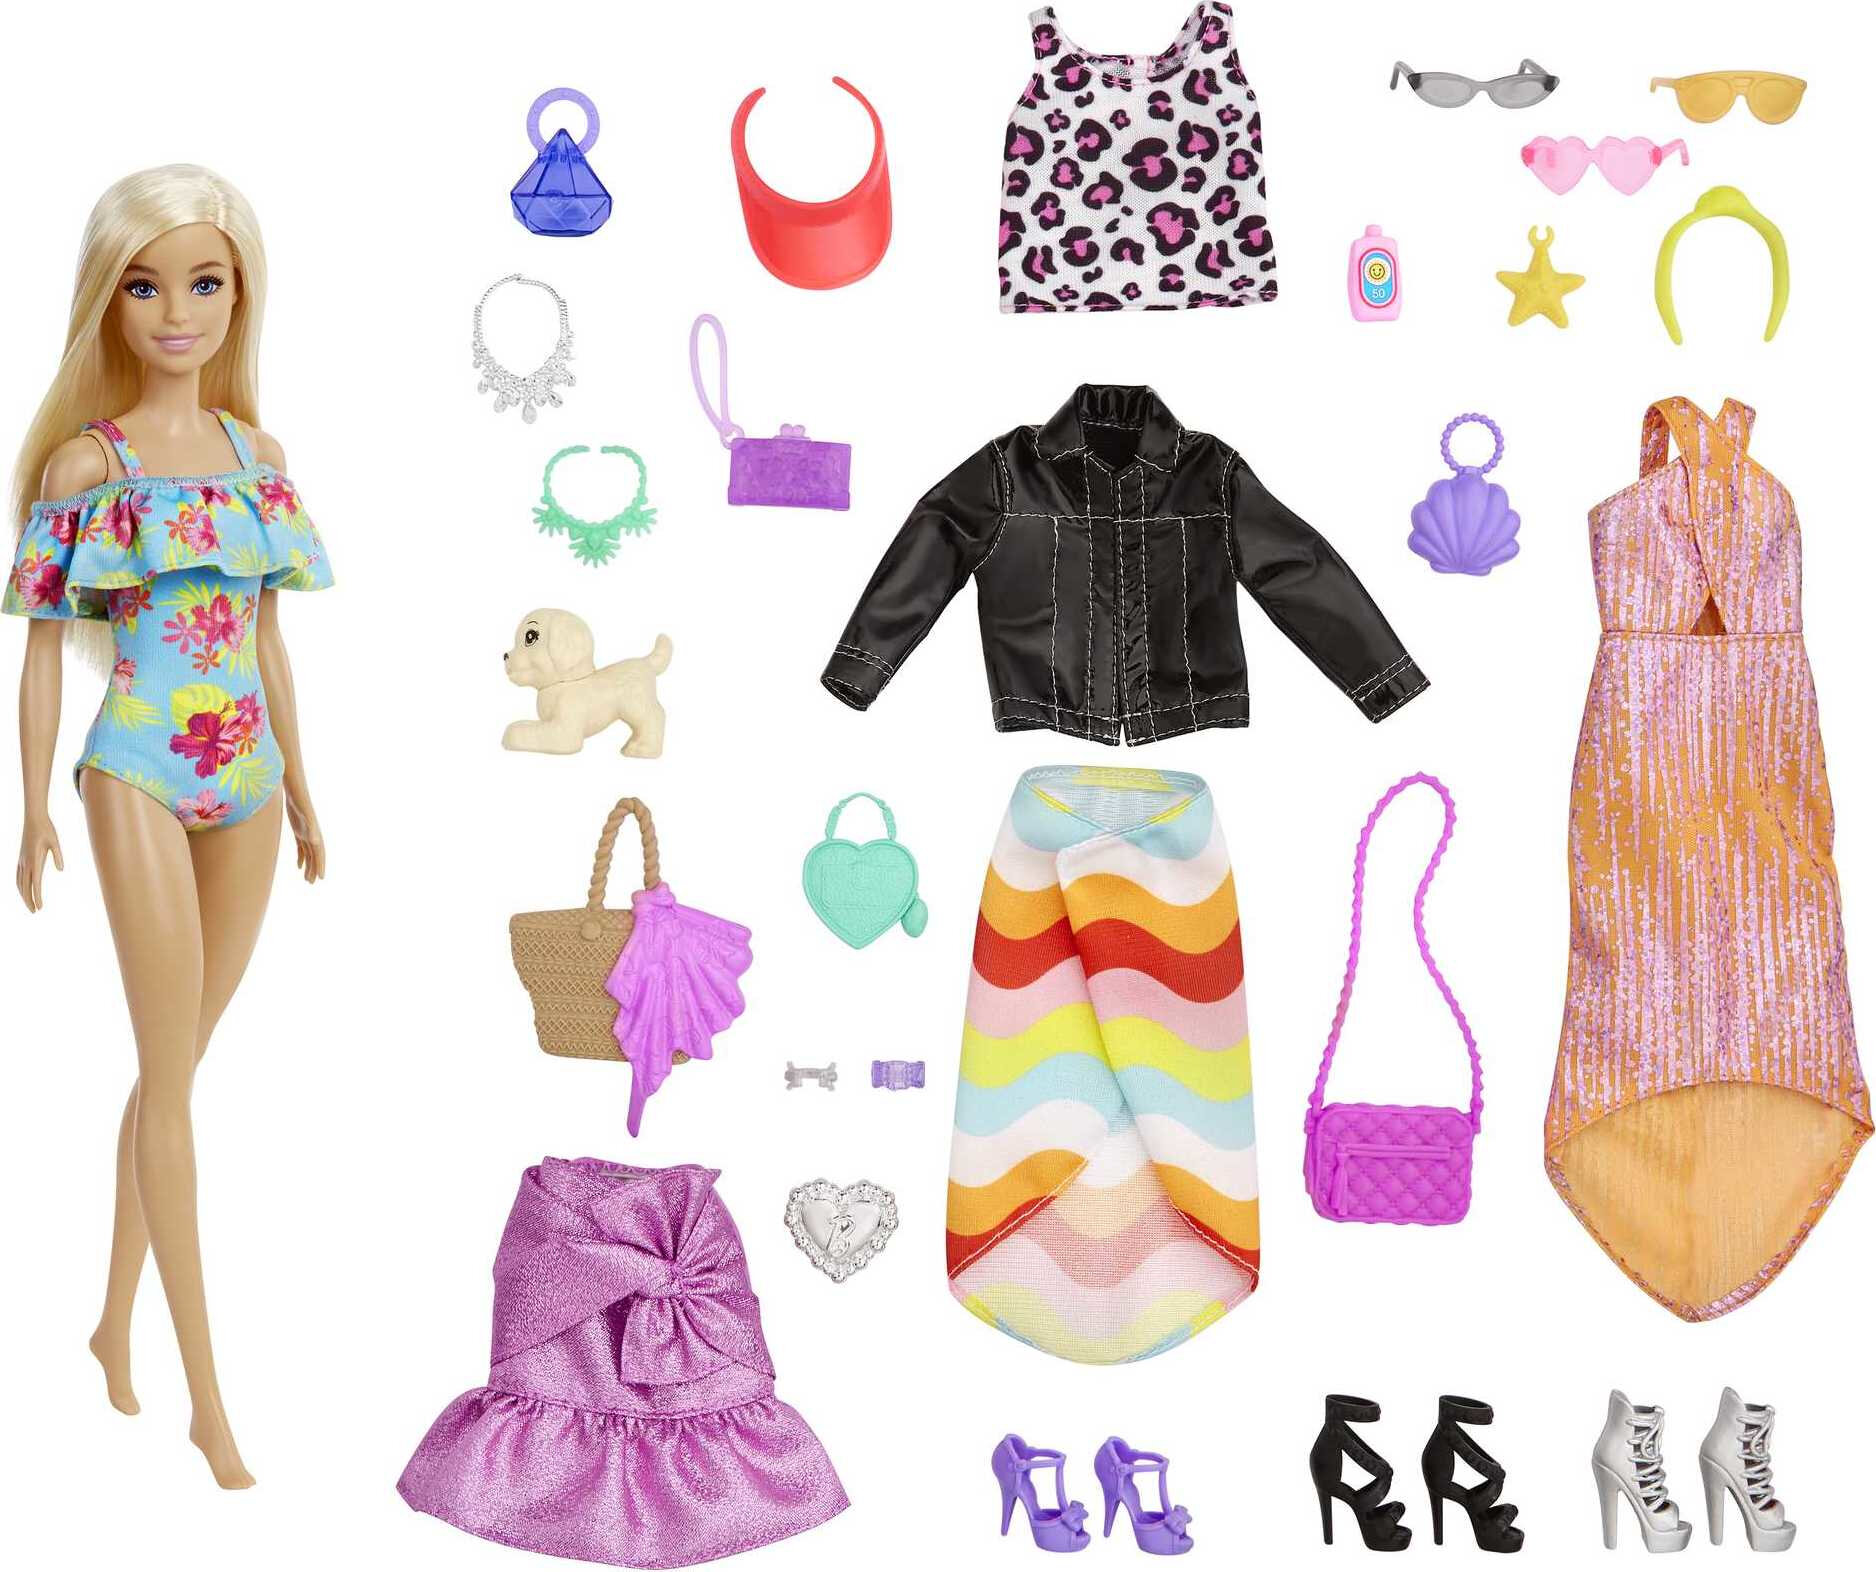 Barbie Advent Calendar with Barbie Doll, 24 Surprises, Day-to-Night Clothing & Accessories, Kids 3 to 7 Years Old - image 2 of 6